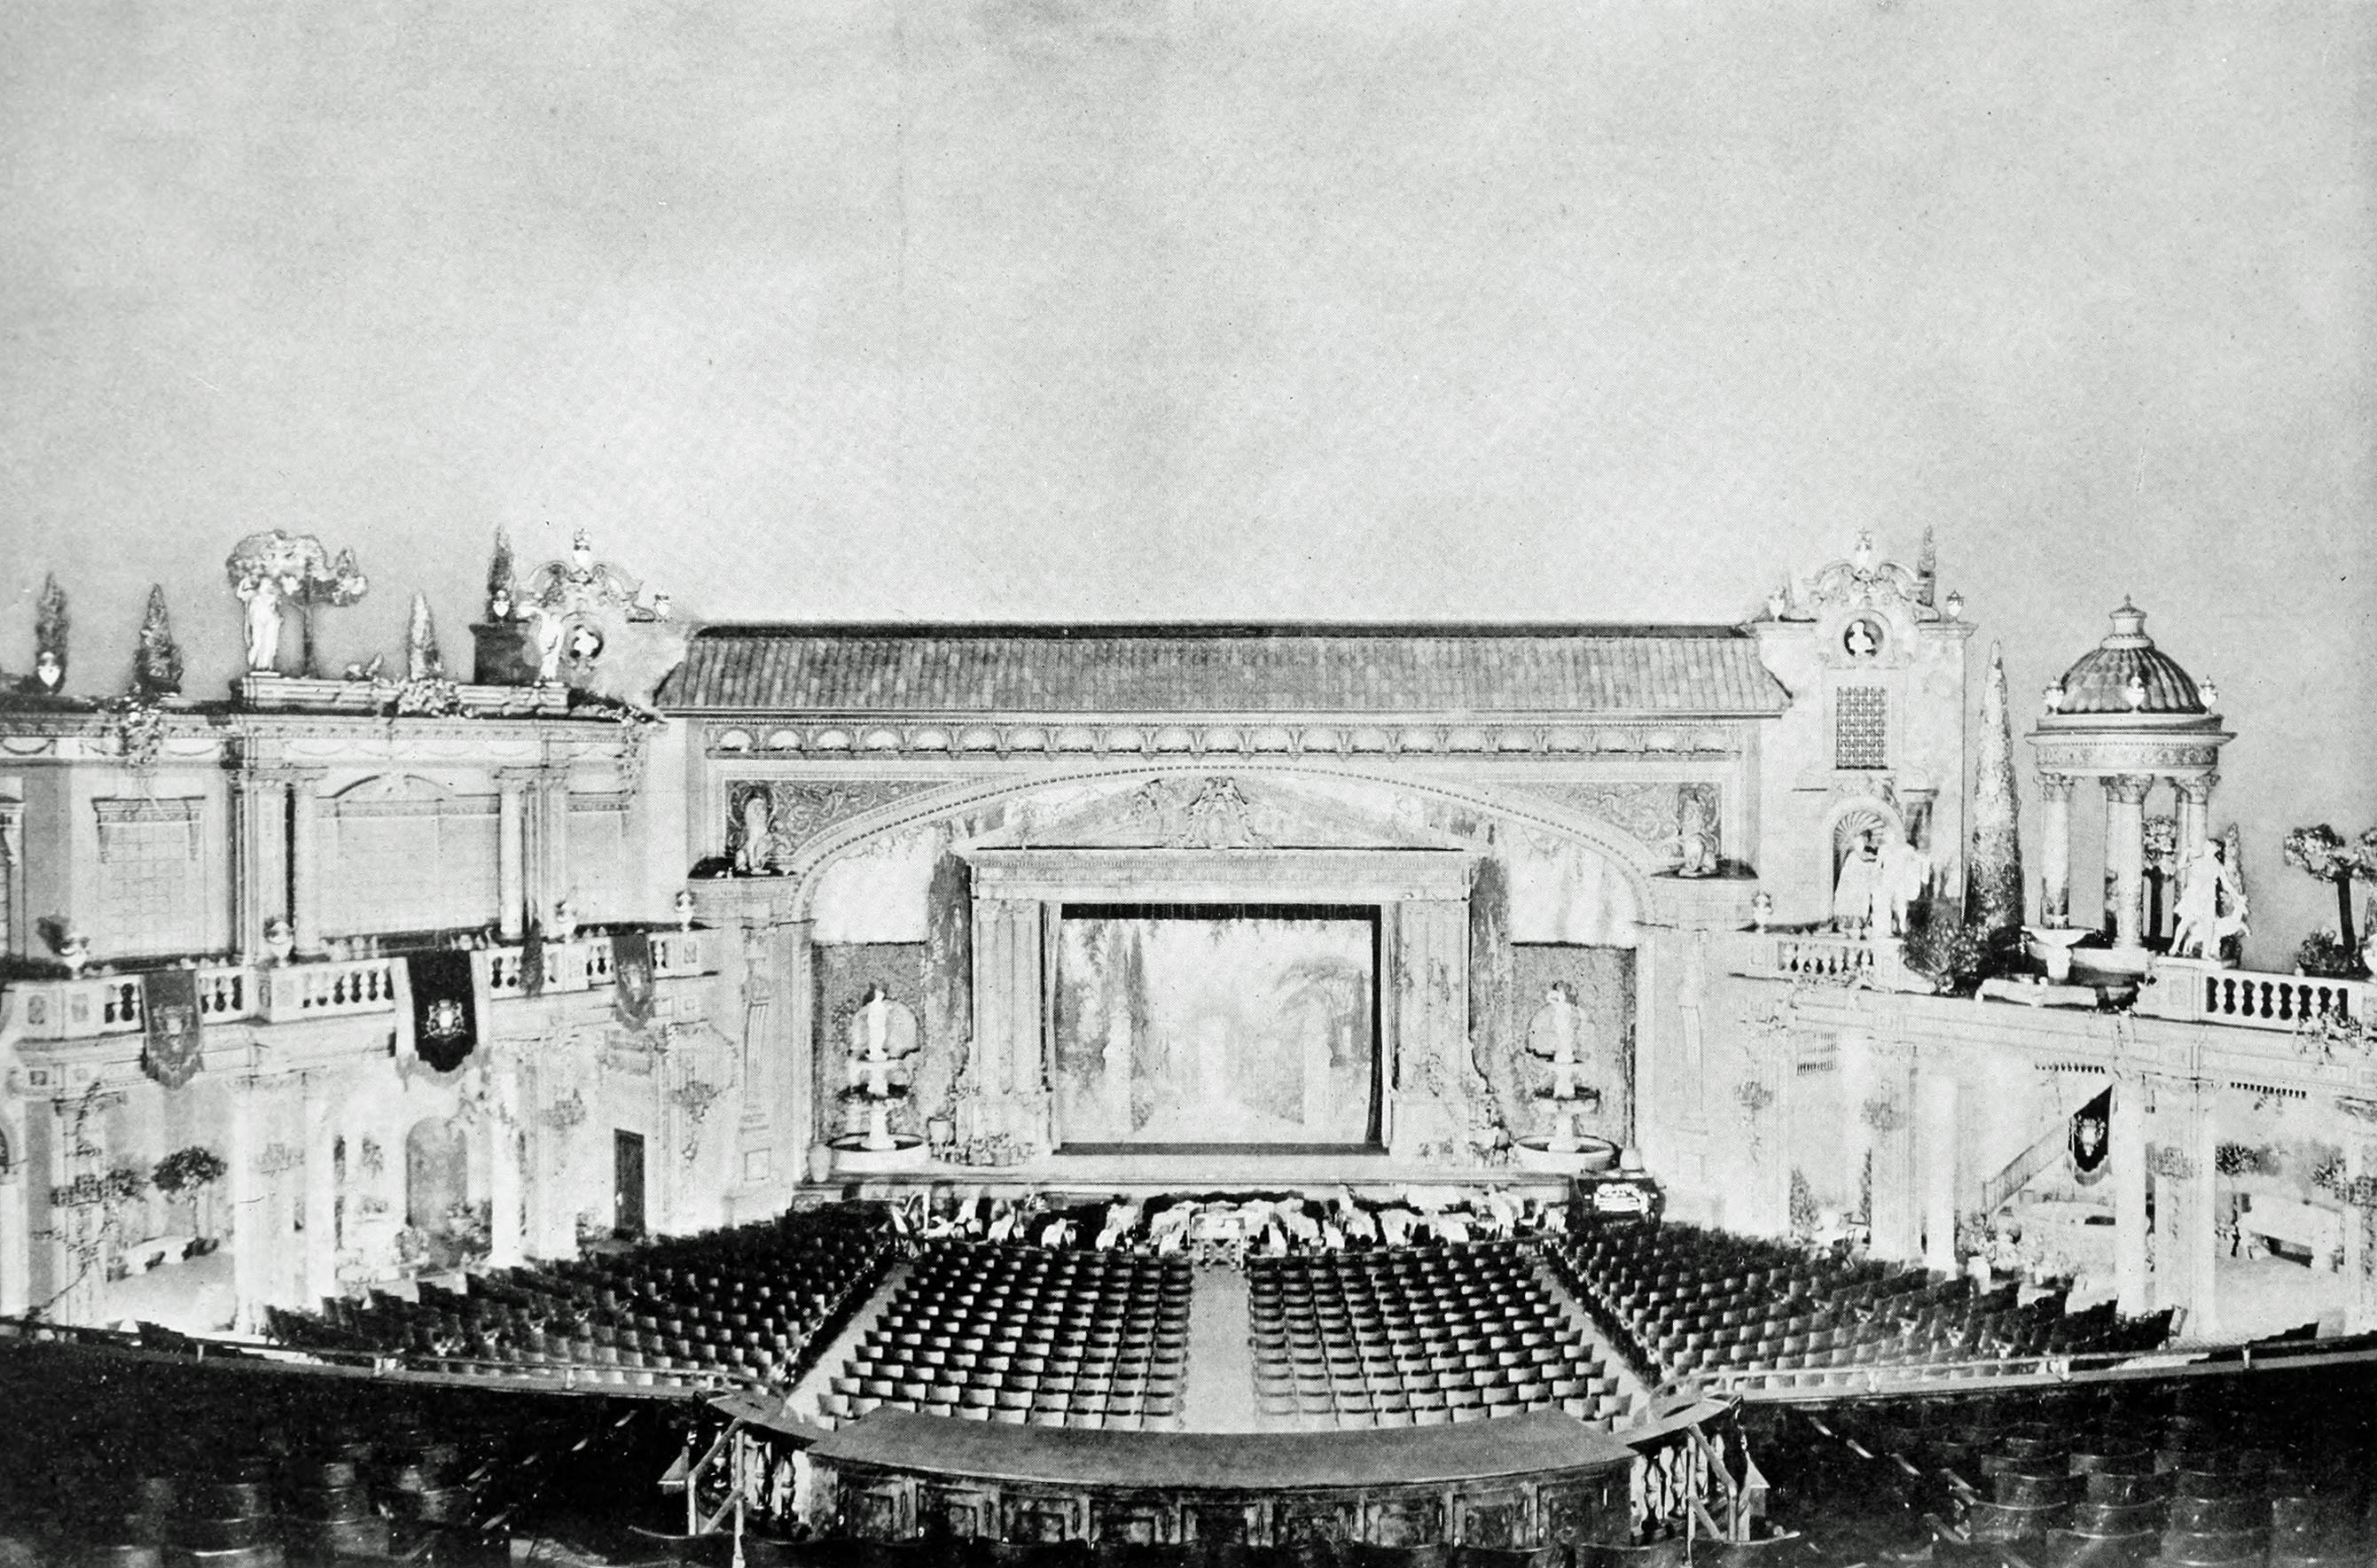 Auditorium of Capitol Theatre, Chicago, with ceiling treated as open sky. Note the dissimilarity in design of the left and right side walls.